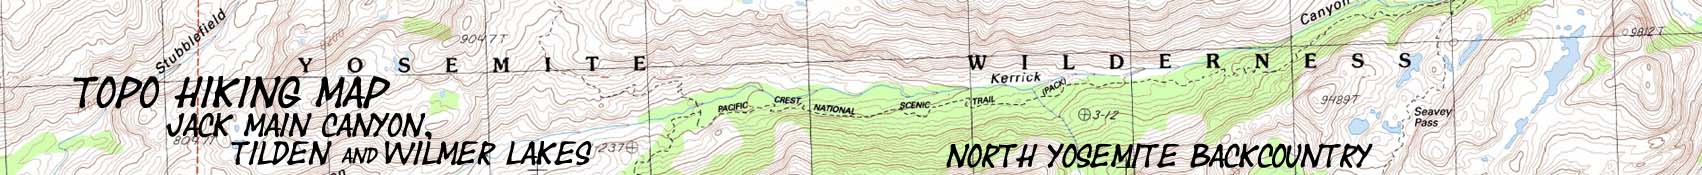 Yosemite Topo Maps: Jack Main Canyon with Tilden and Wilmer Lakes